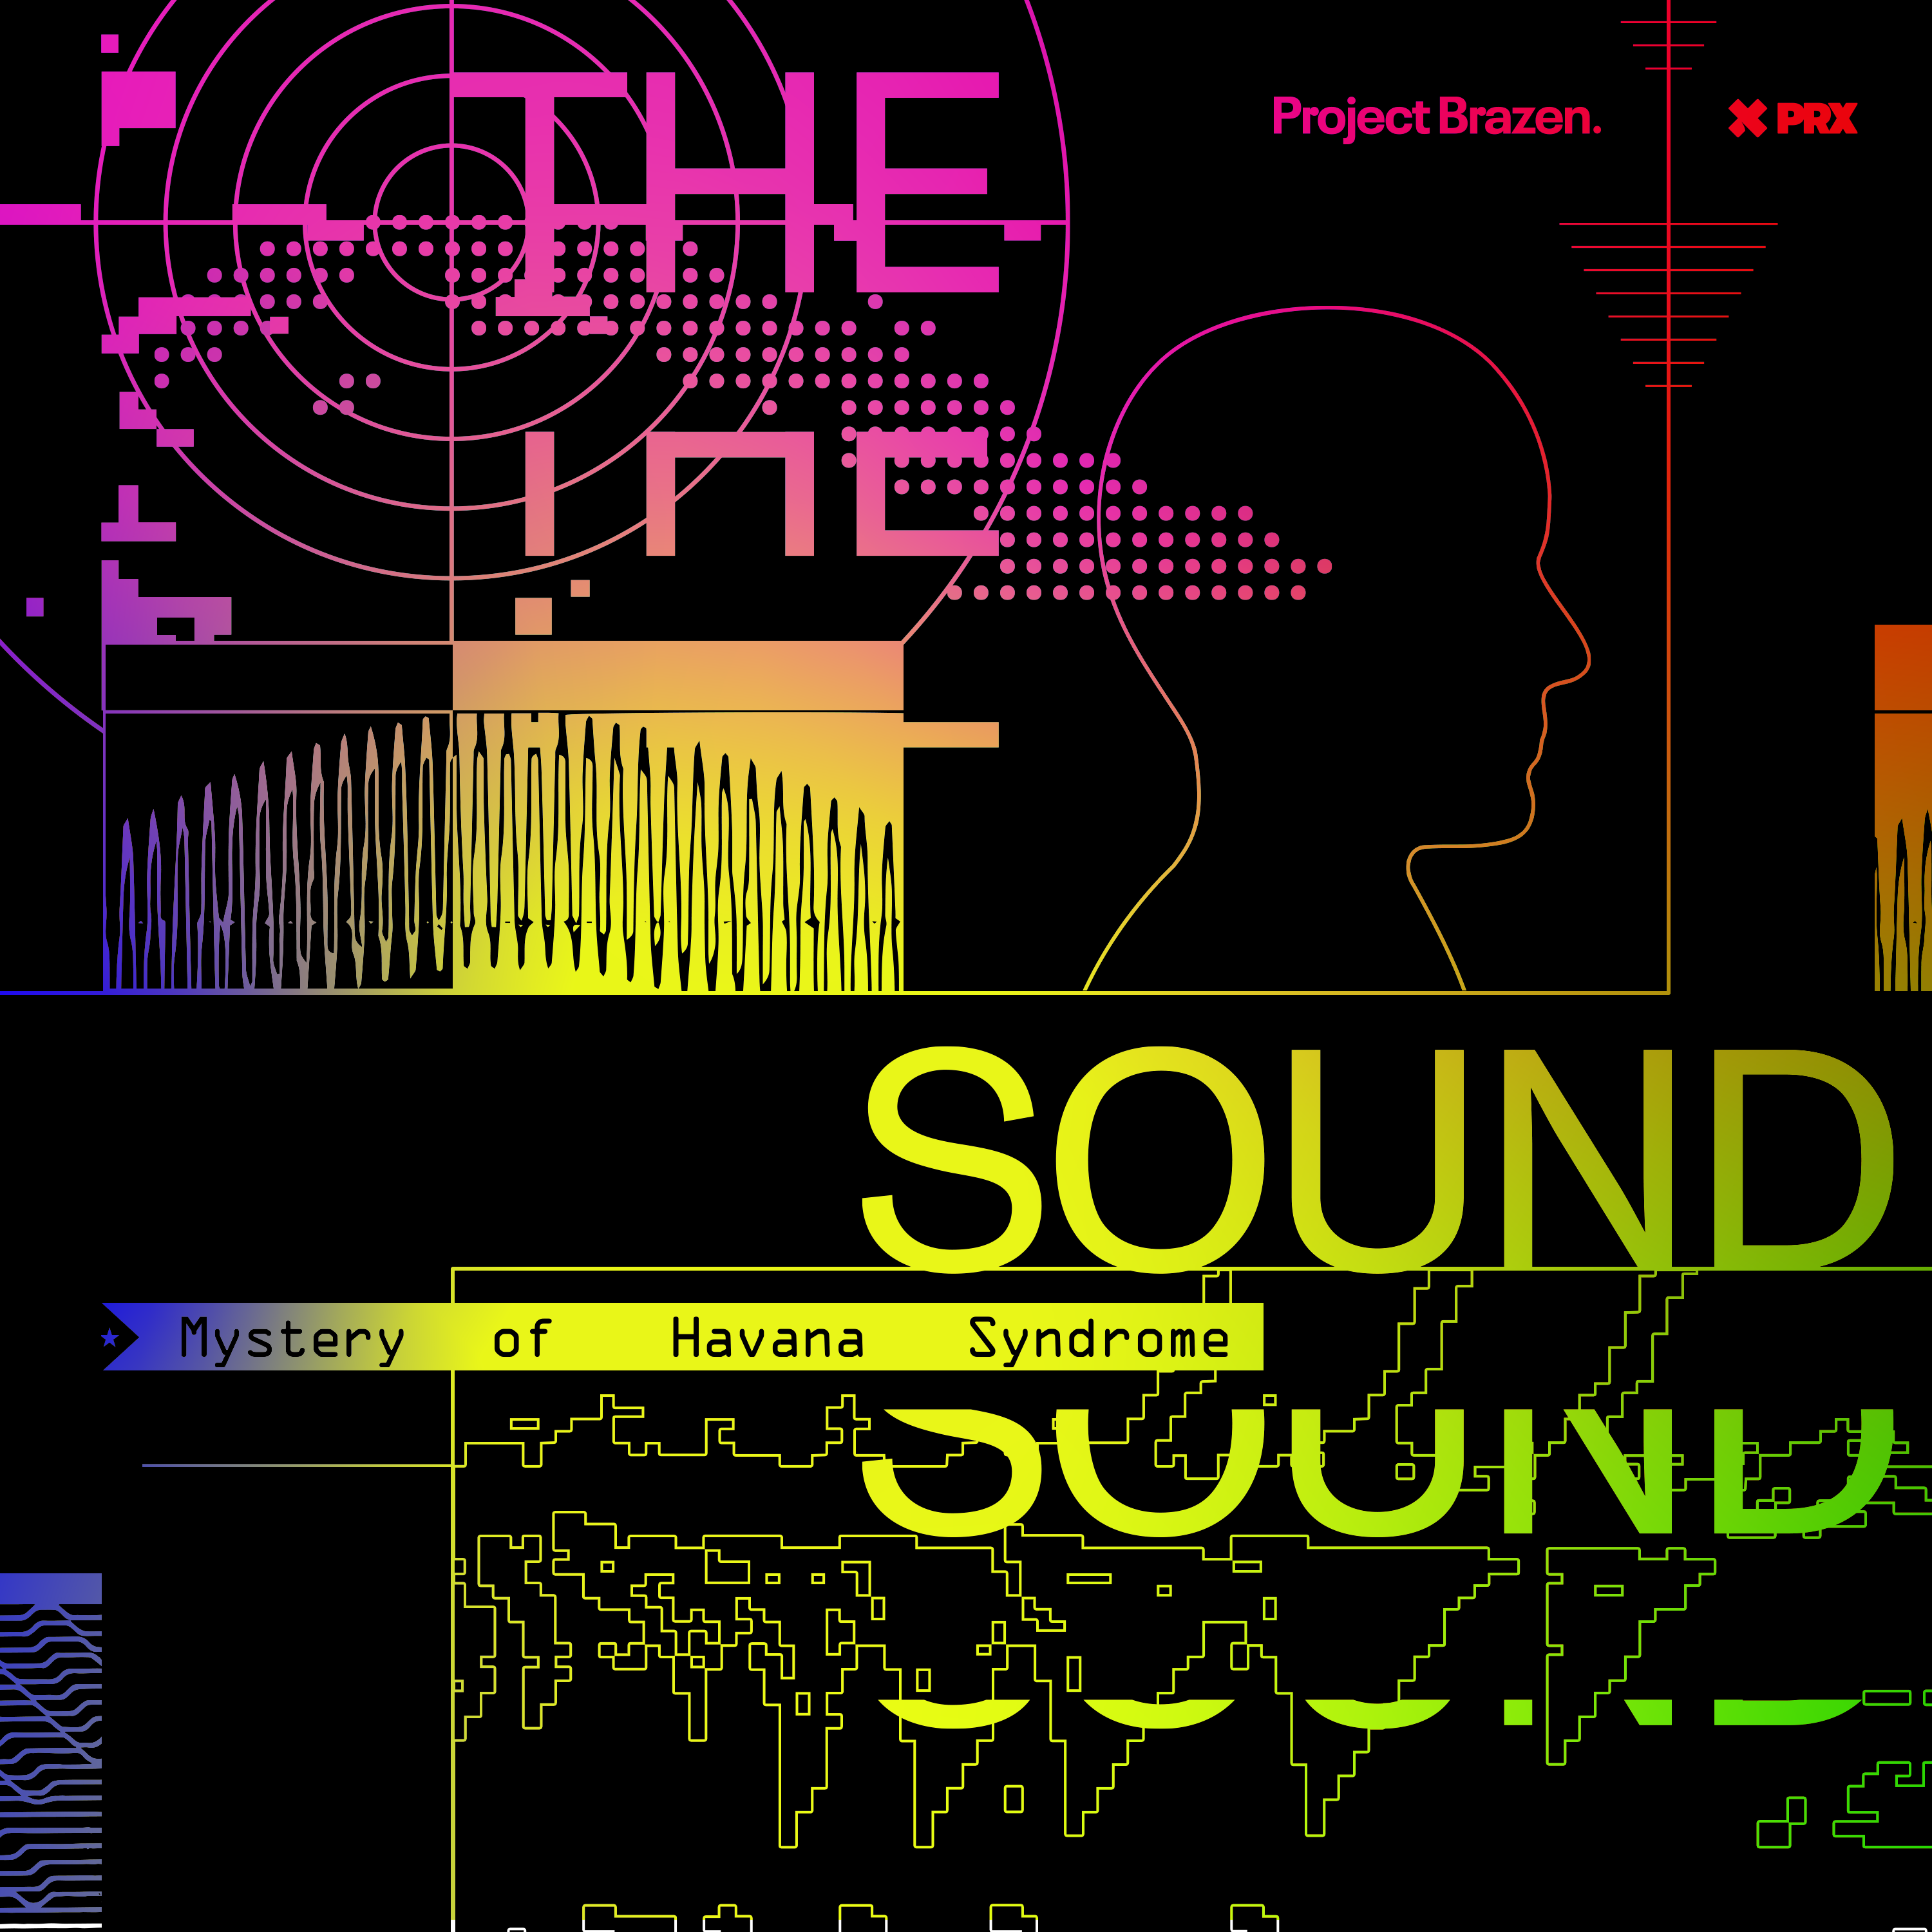 The Sound: Mystery of Havana Syndrome podcast show image